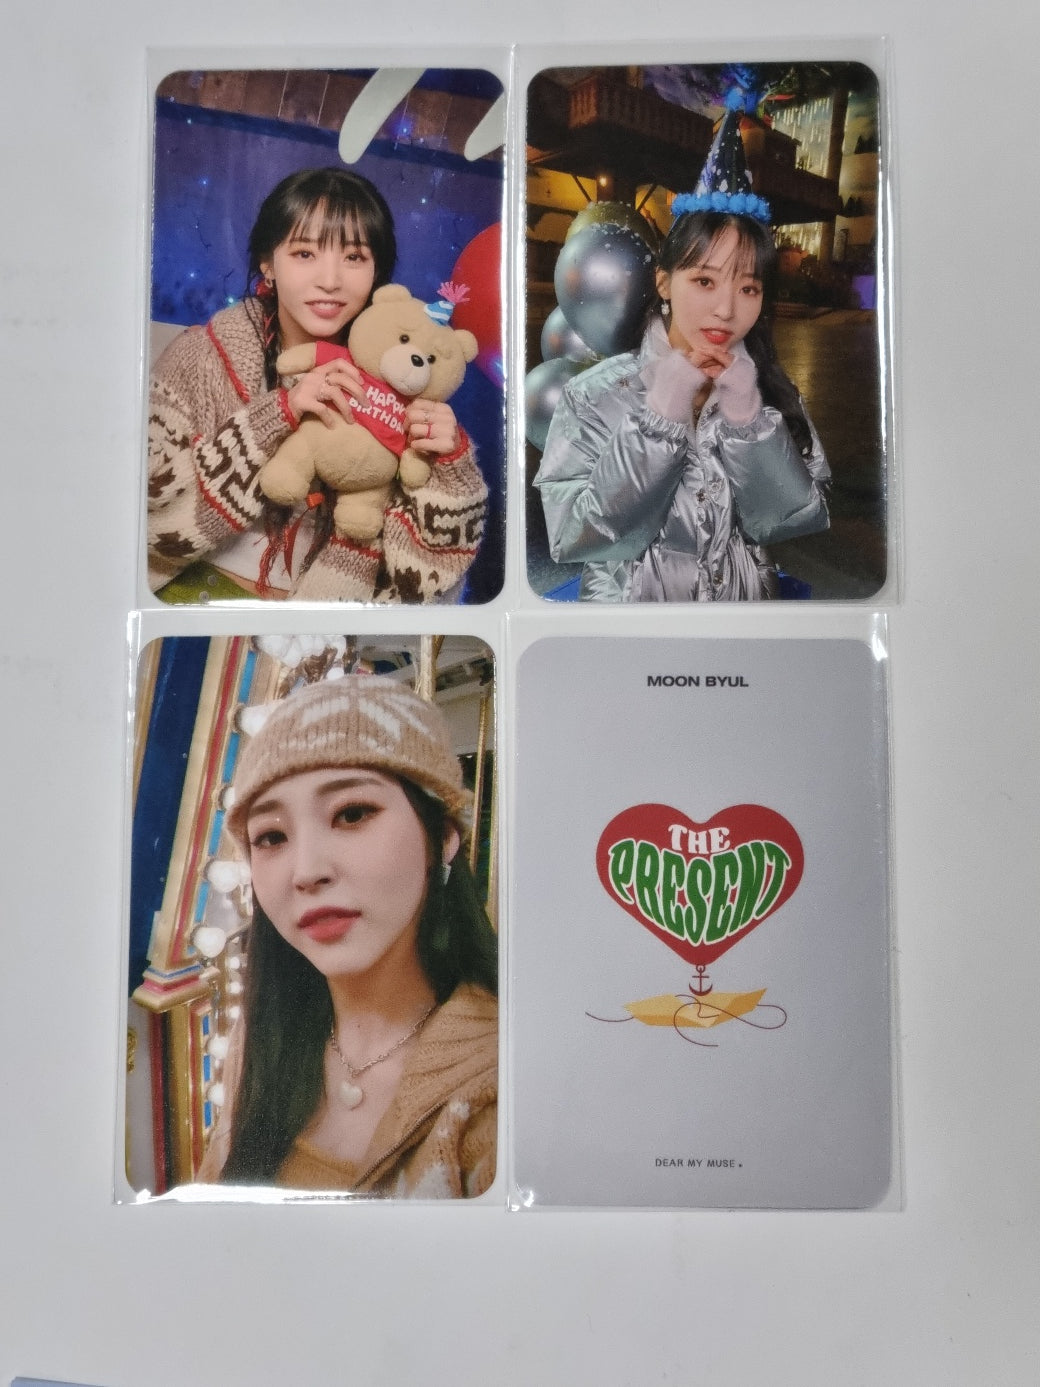 Moon Byul "The Present" - Dear My Muse Pre-Order Benefit Photocard